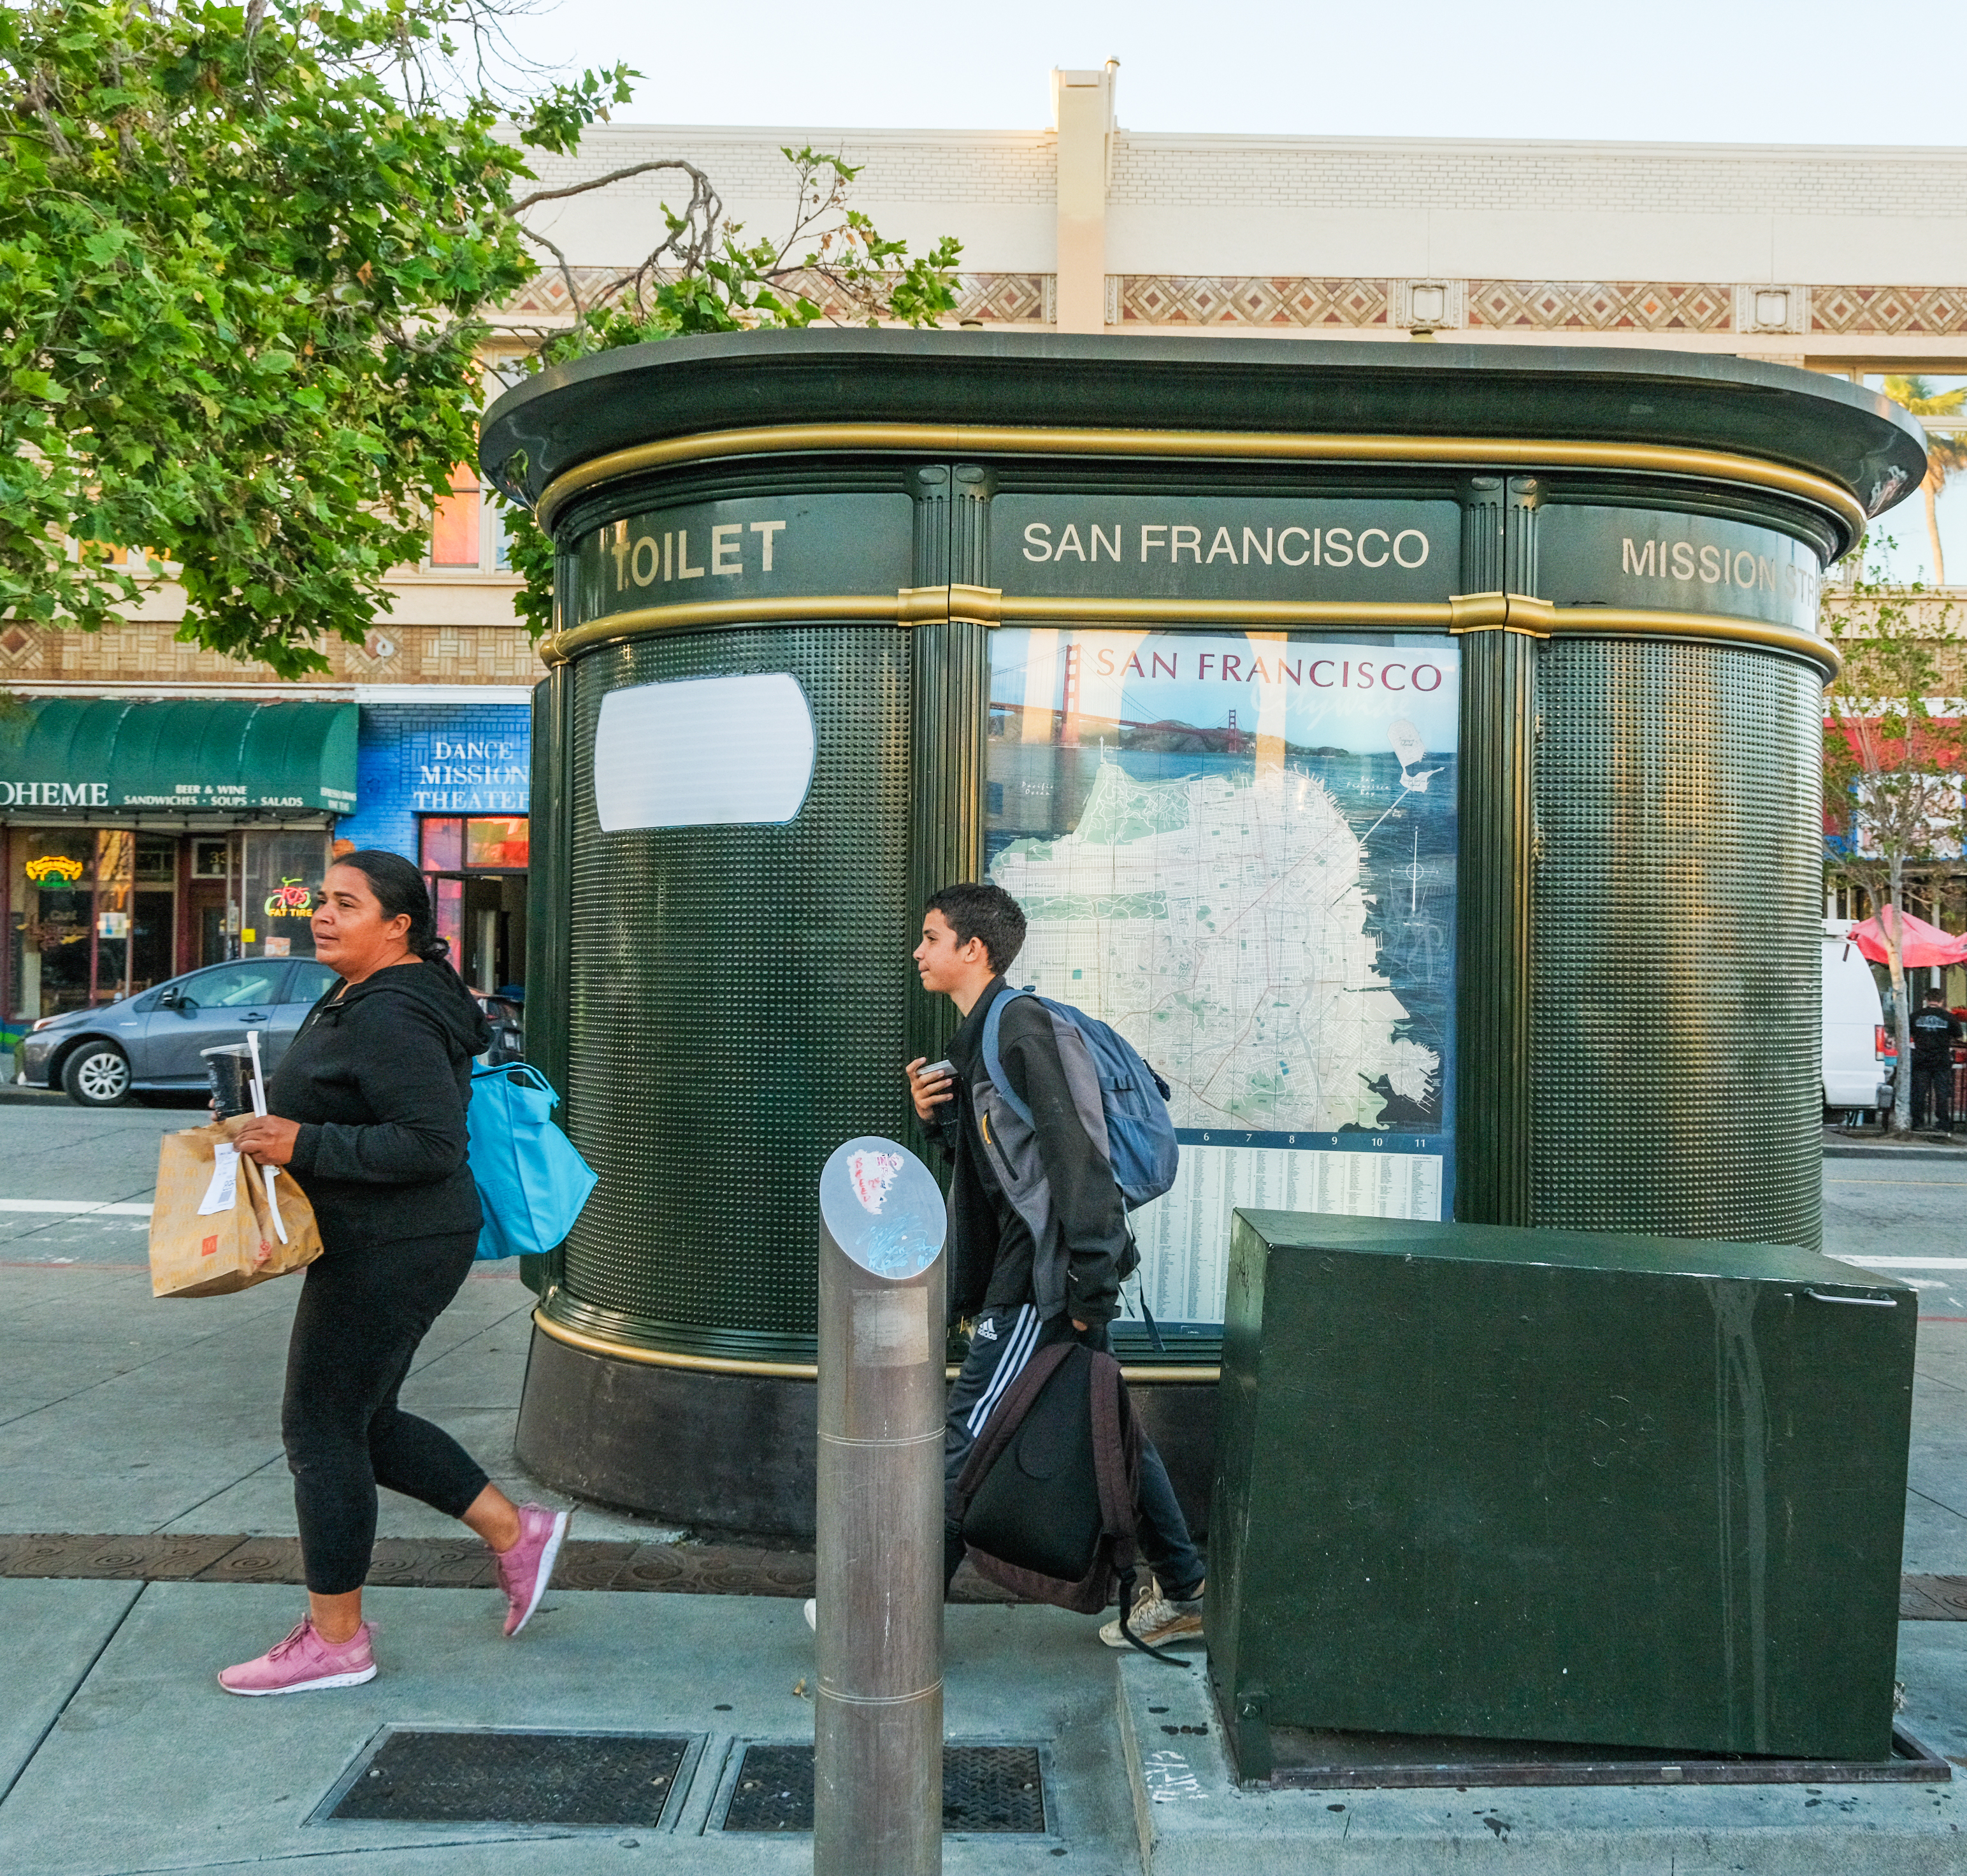 A self-cleaning public toilet in San Francisco with people walking by on the sidewalk.